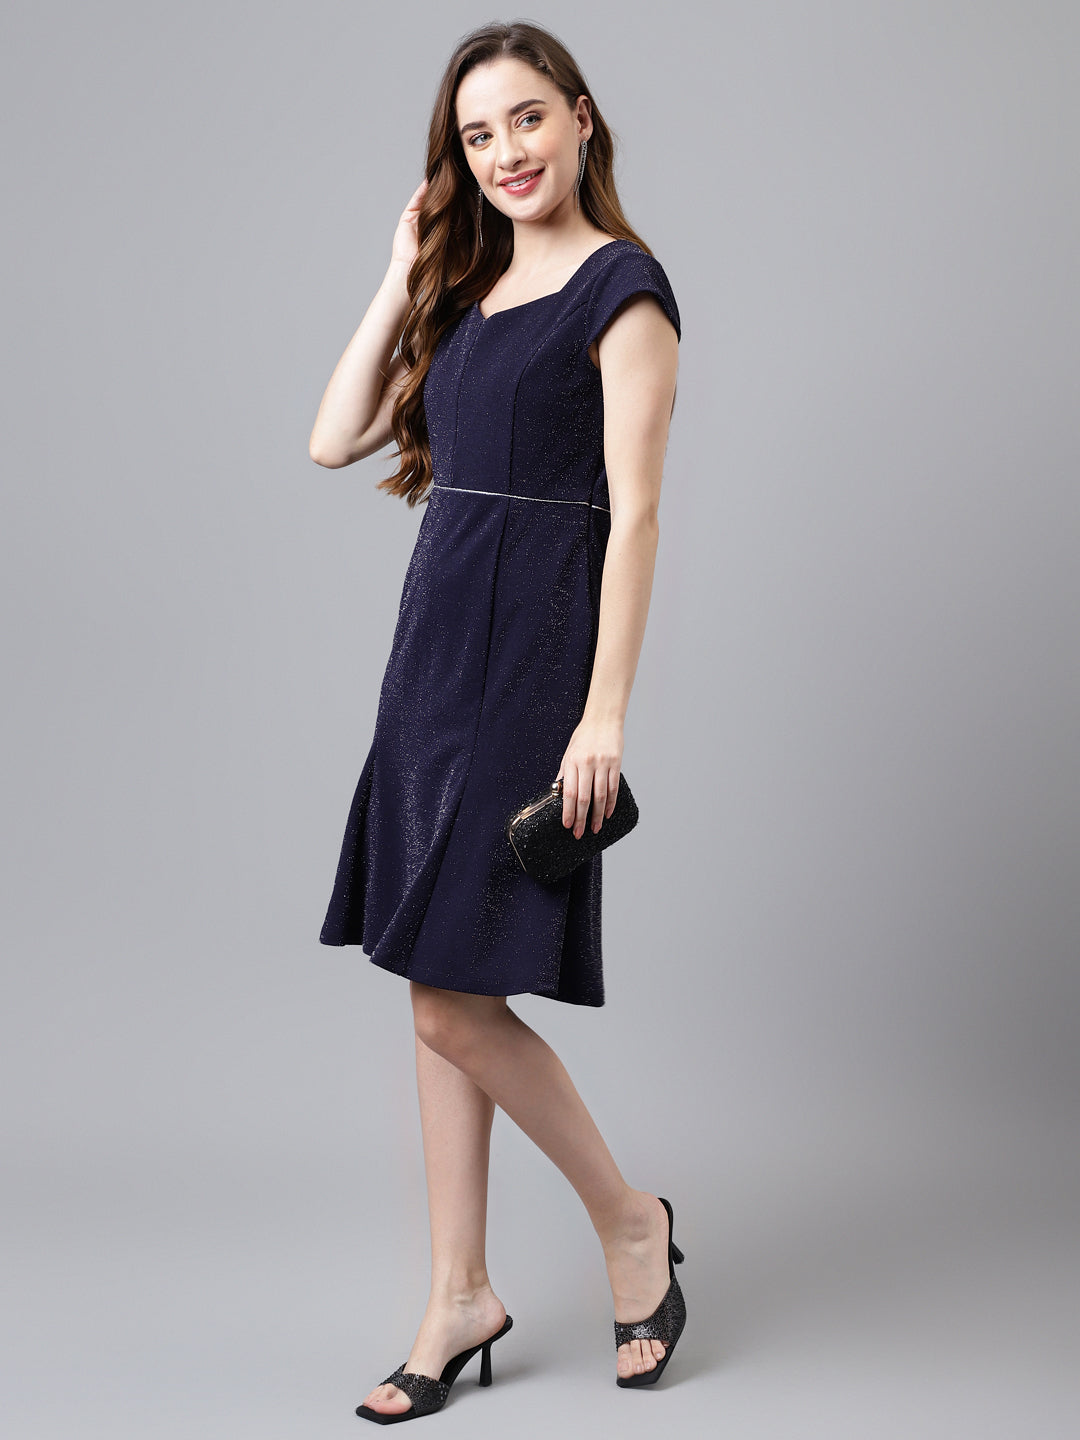 Blue Navy Cap Sleeve Solid Normal A-Line Dress